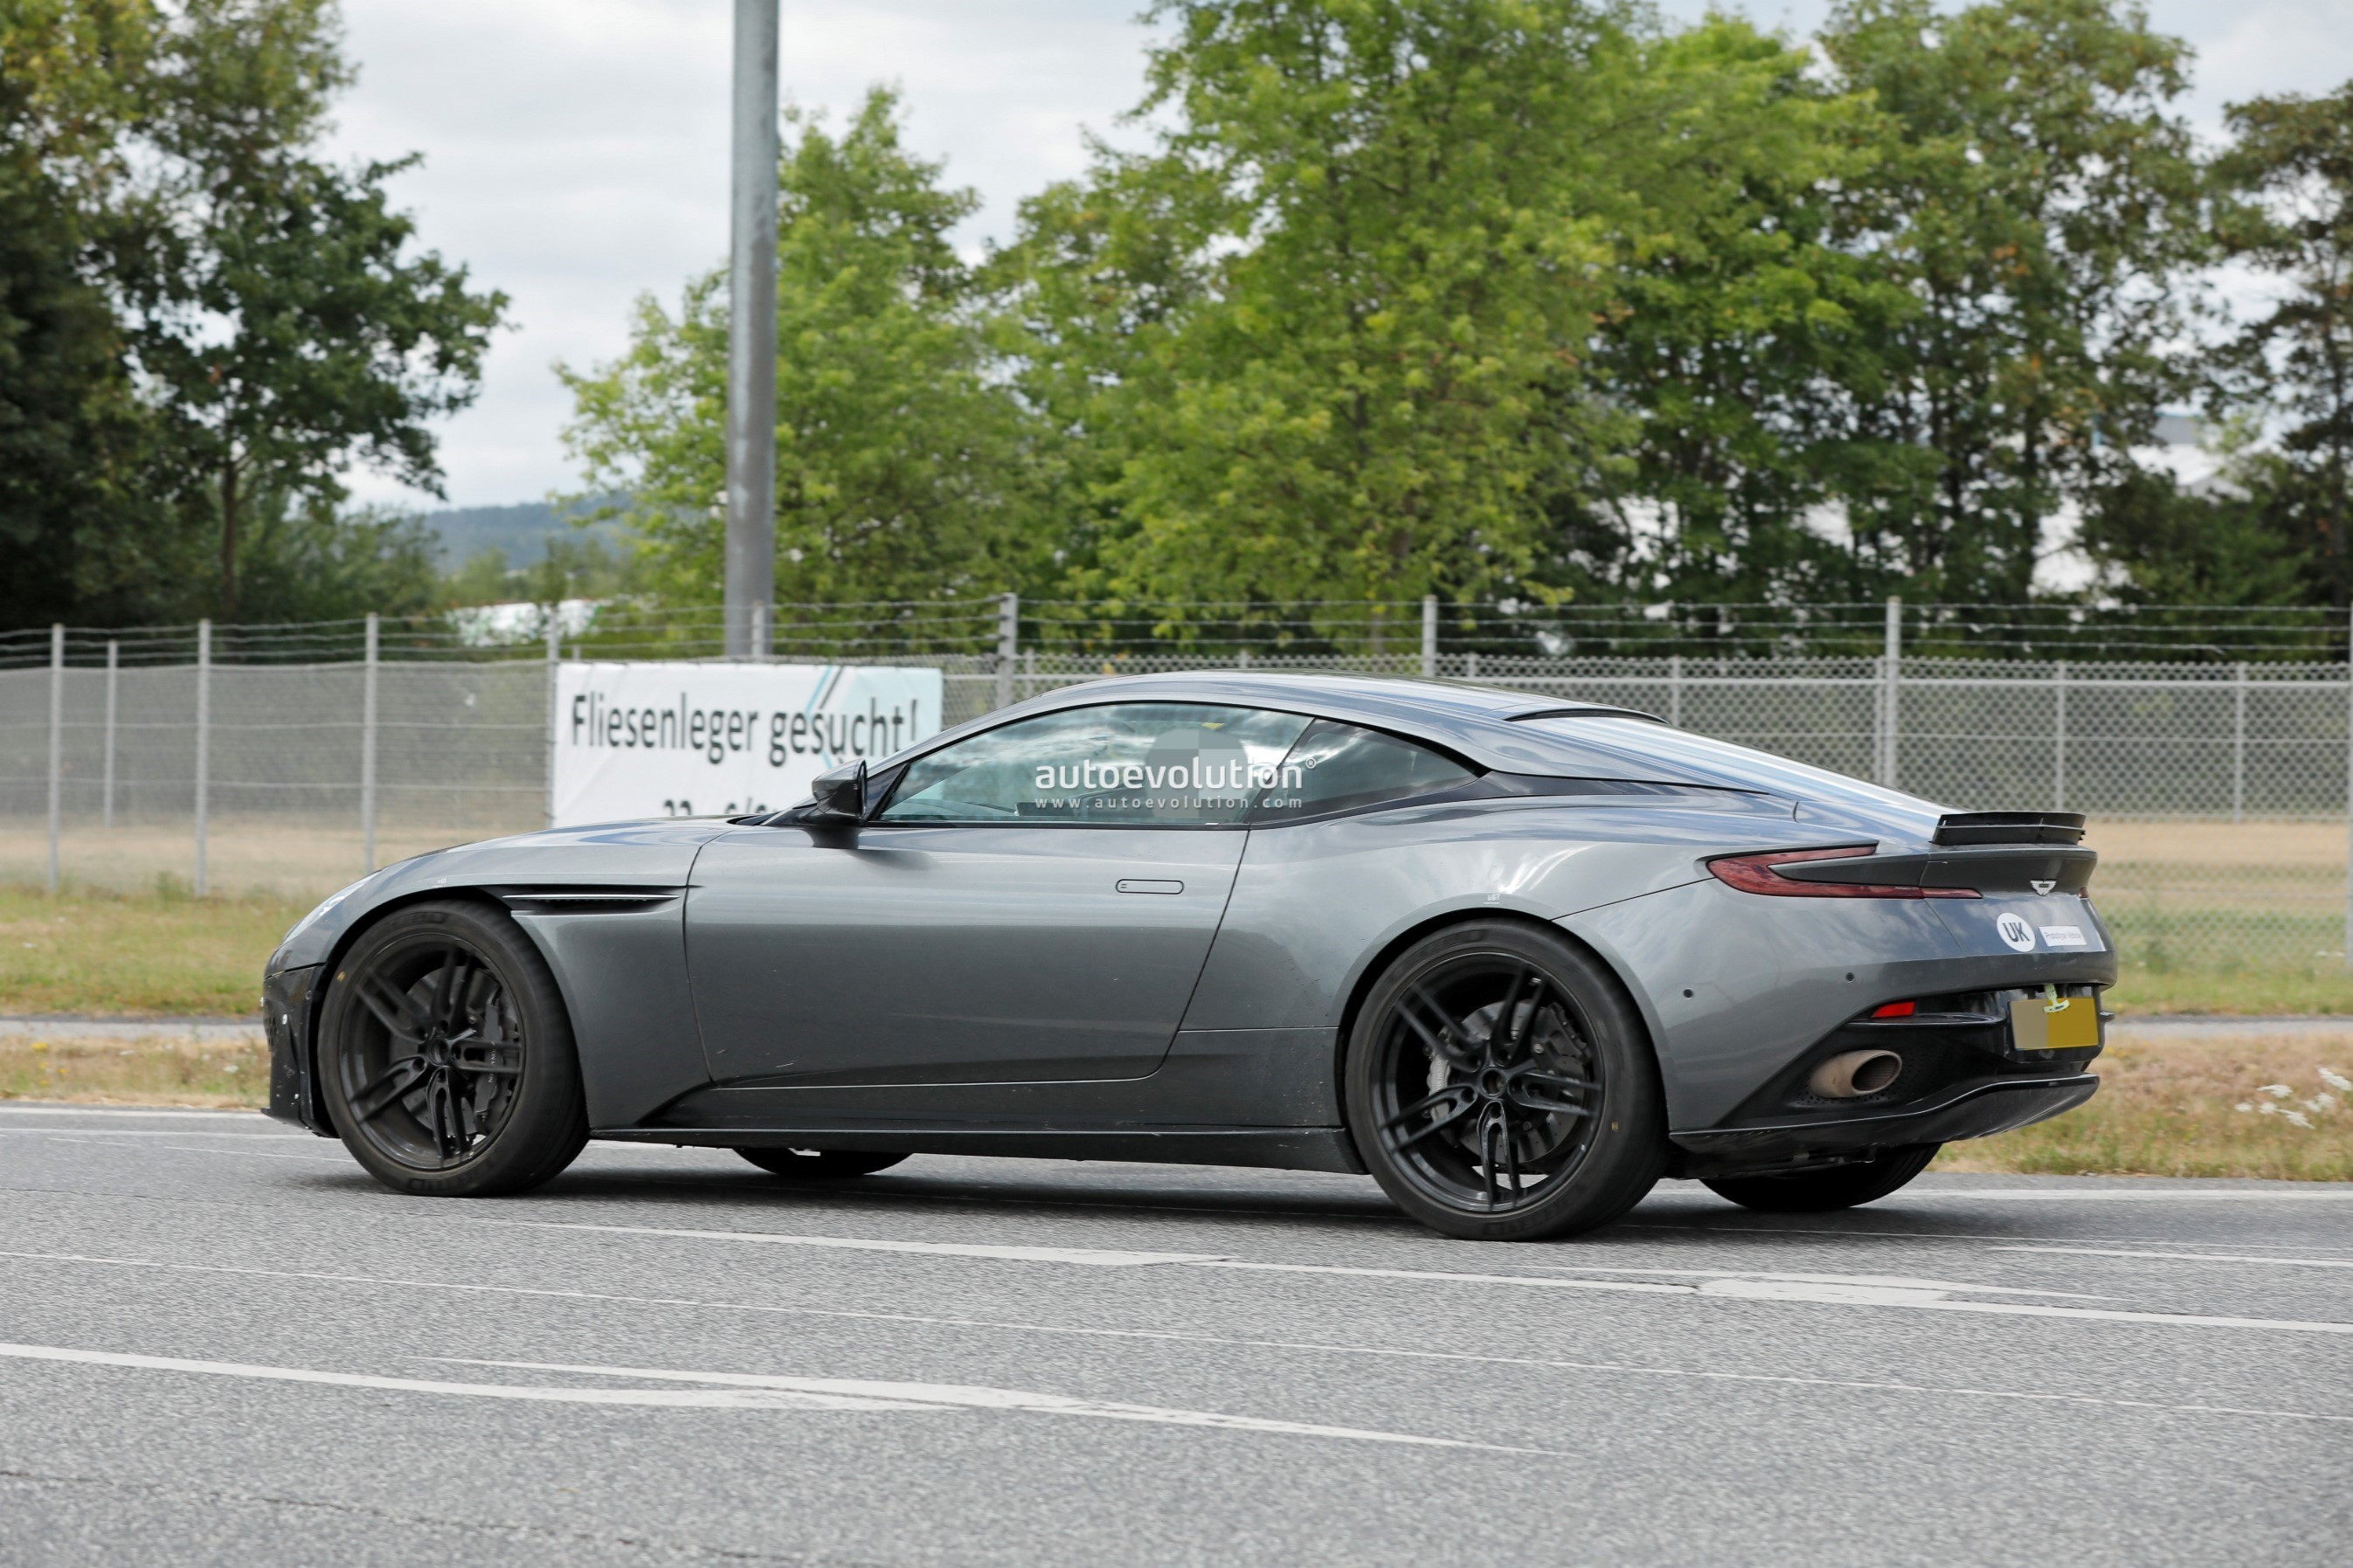 2024 Aston Martin Db11 Facelift Spied Testing Touchscreen Infotainment Confirmed 7 